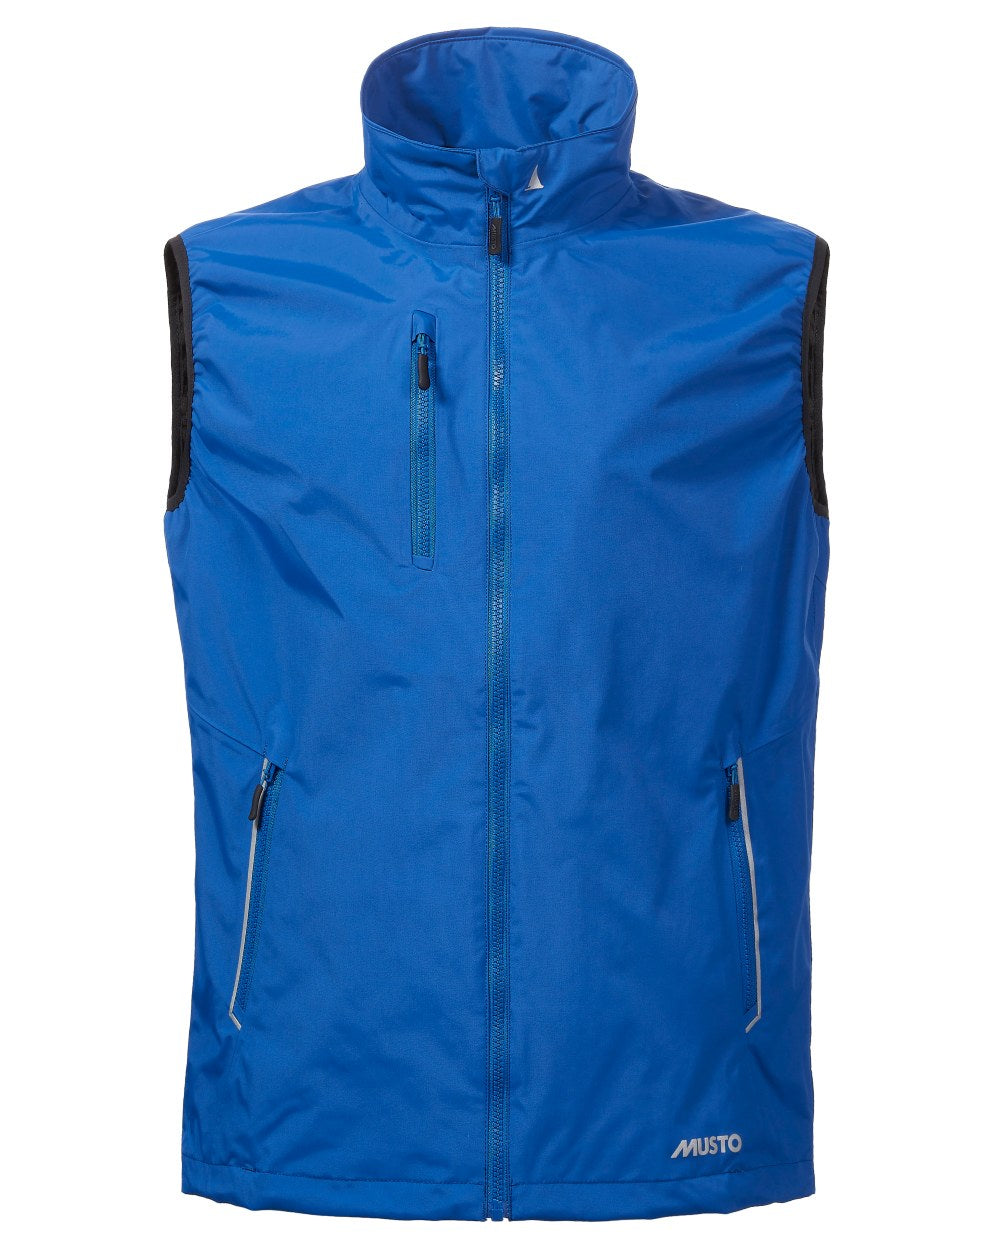 Racer Blue Coloured Musto Corsica Gilet 2.0 On A White Background 